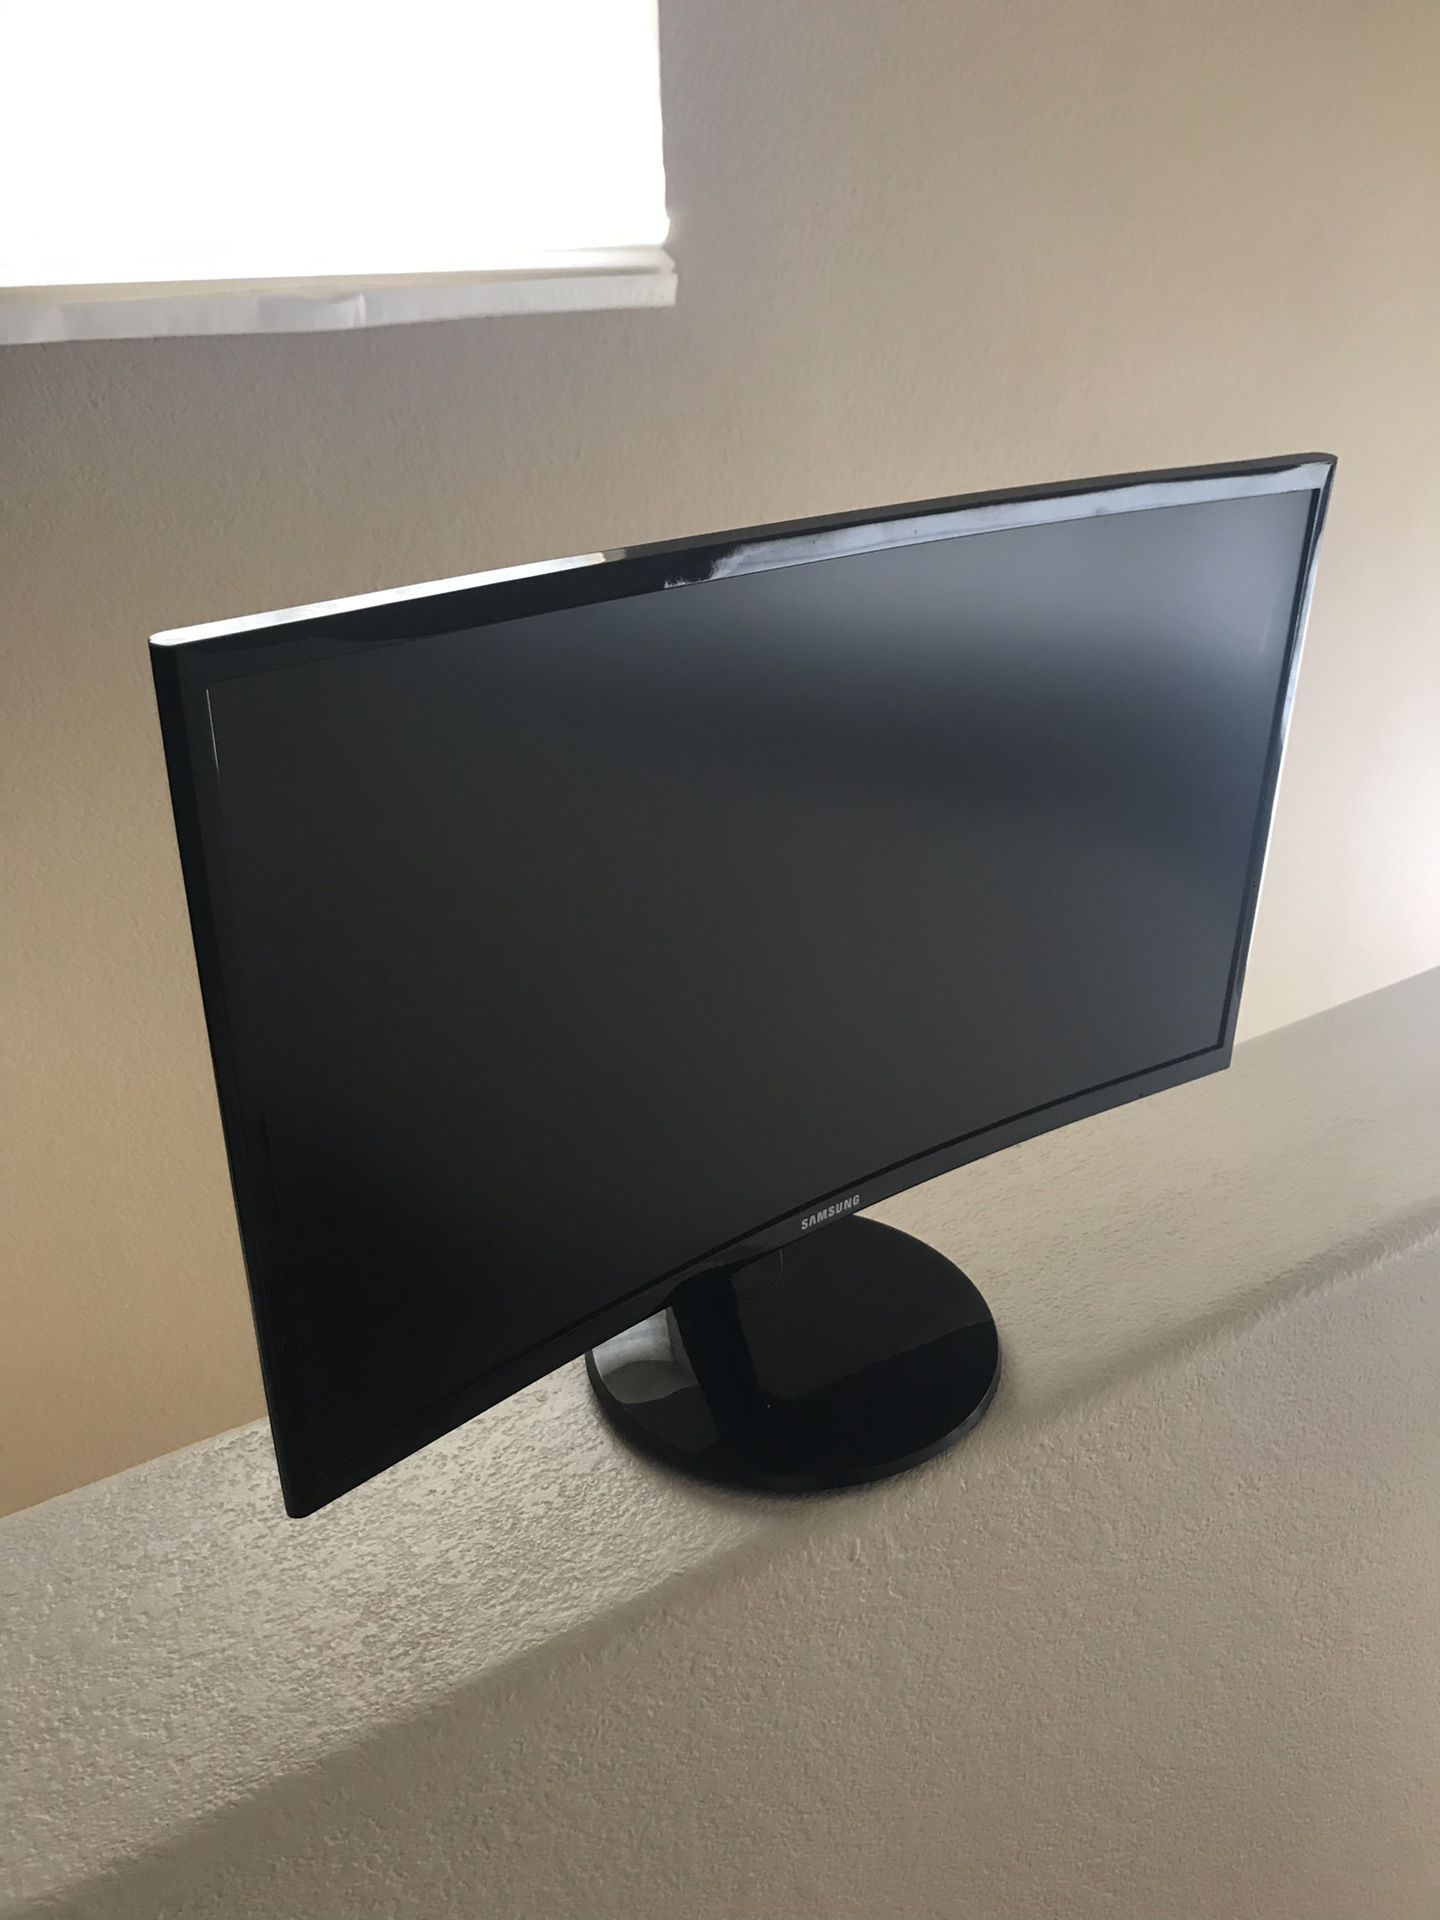 24’ Samsung Curved LED Monitor